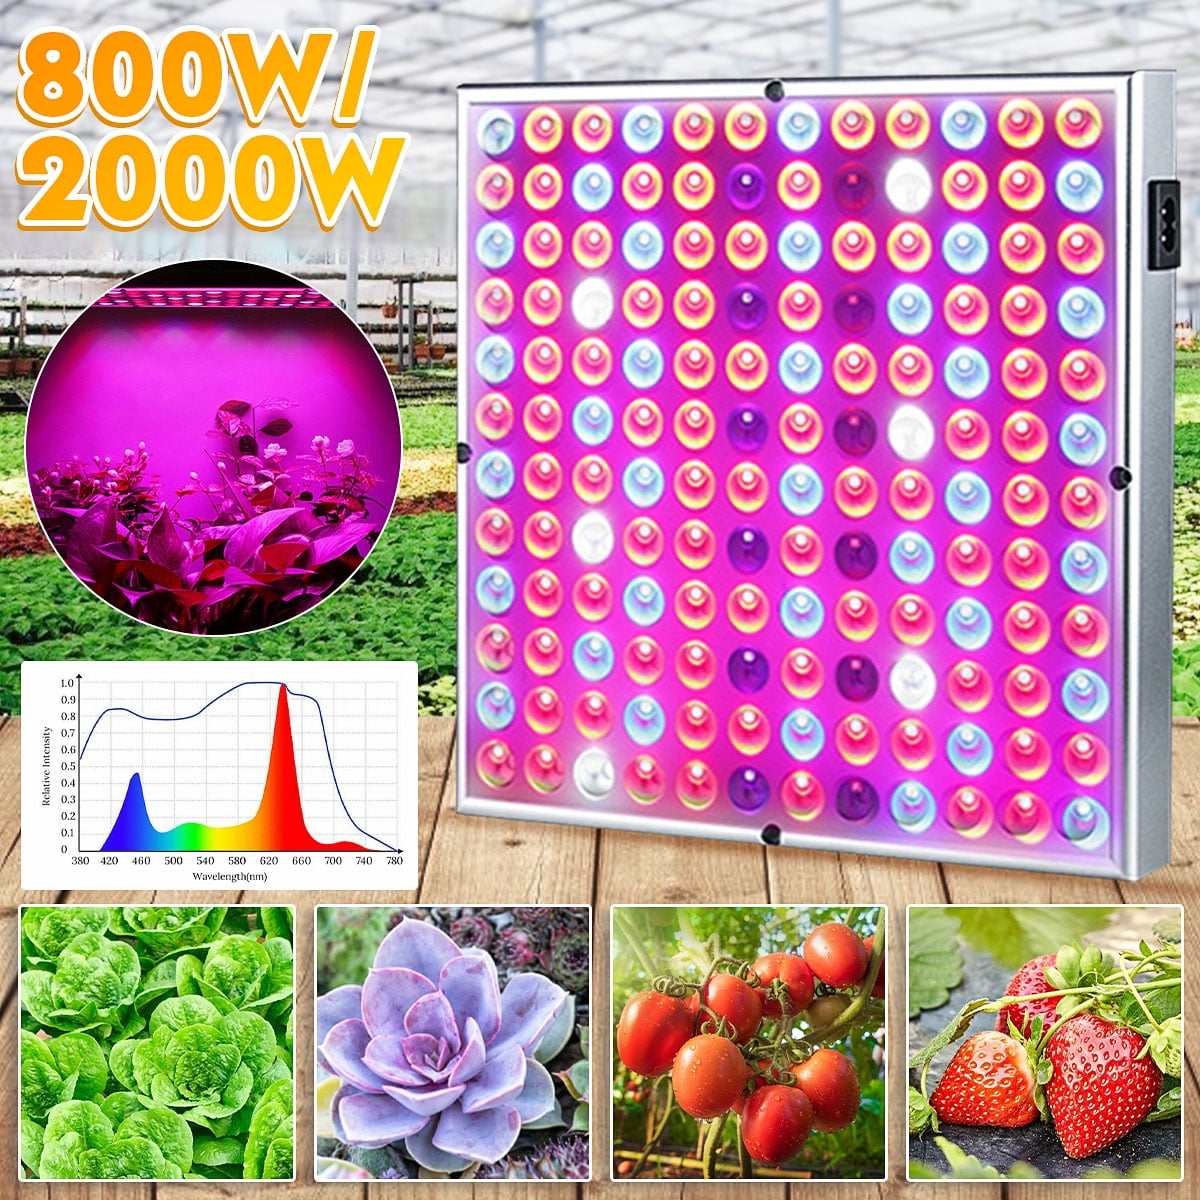 8000W 144 LED Grow Light Hydroponic Full Spectrum Indoor Plant Flower Growing US 